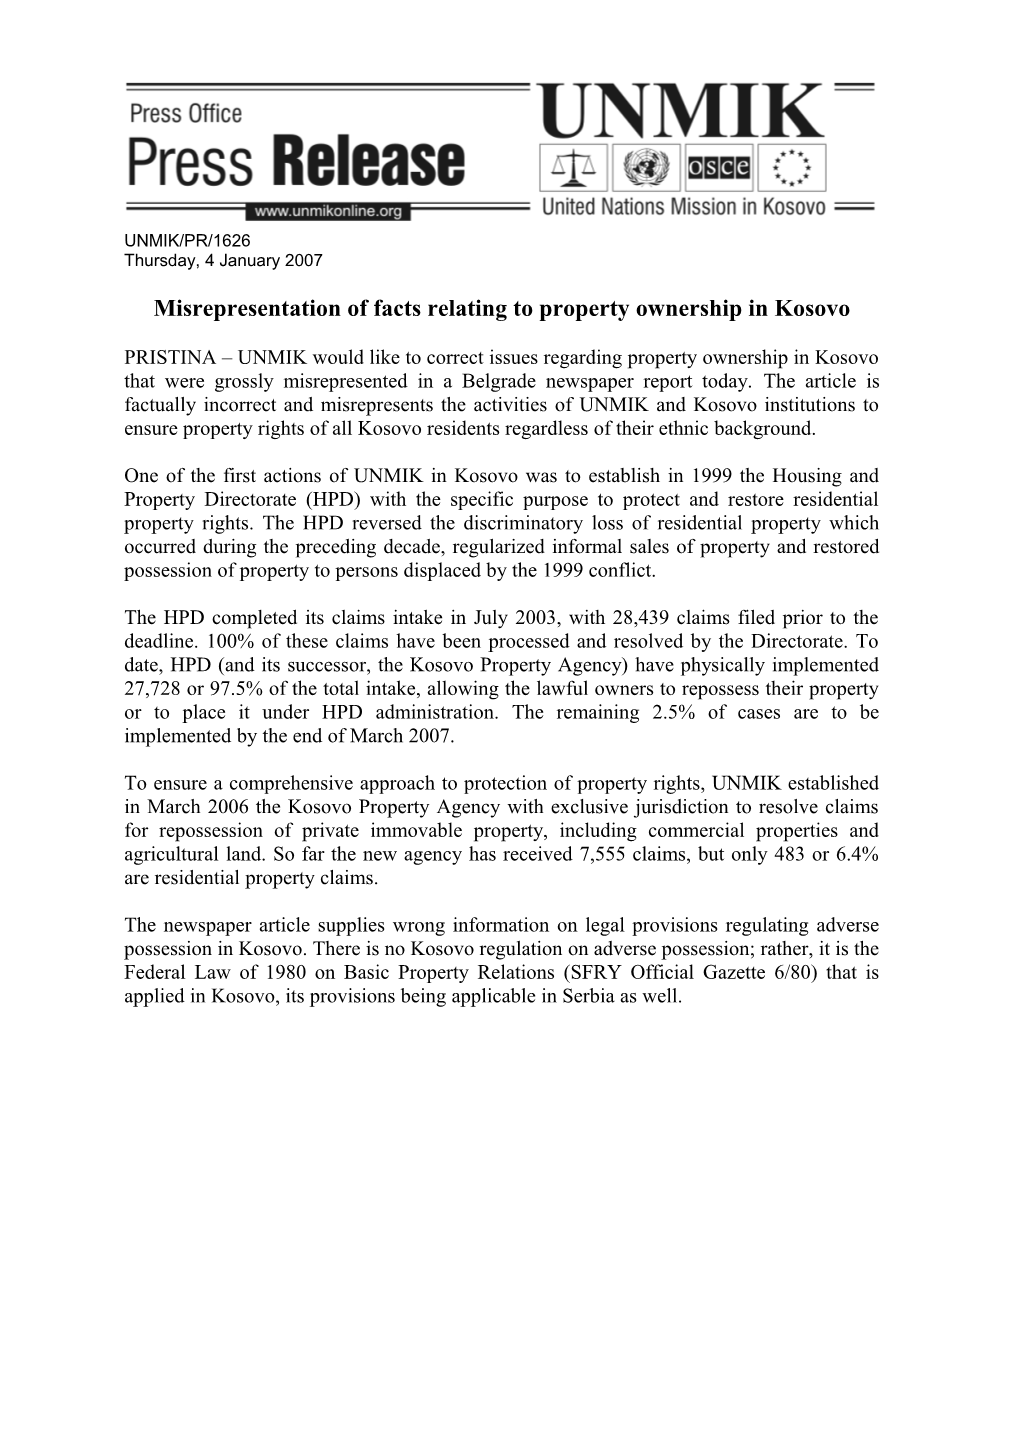 04/01/2007 - Misrepresentation of Facts Relating to Property Ownership in Kosovo